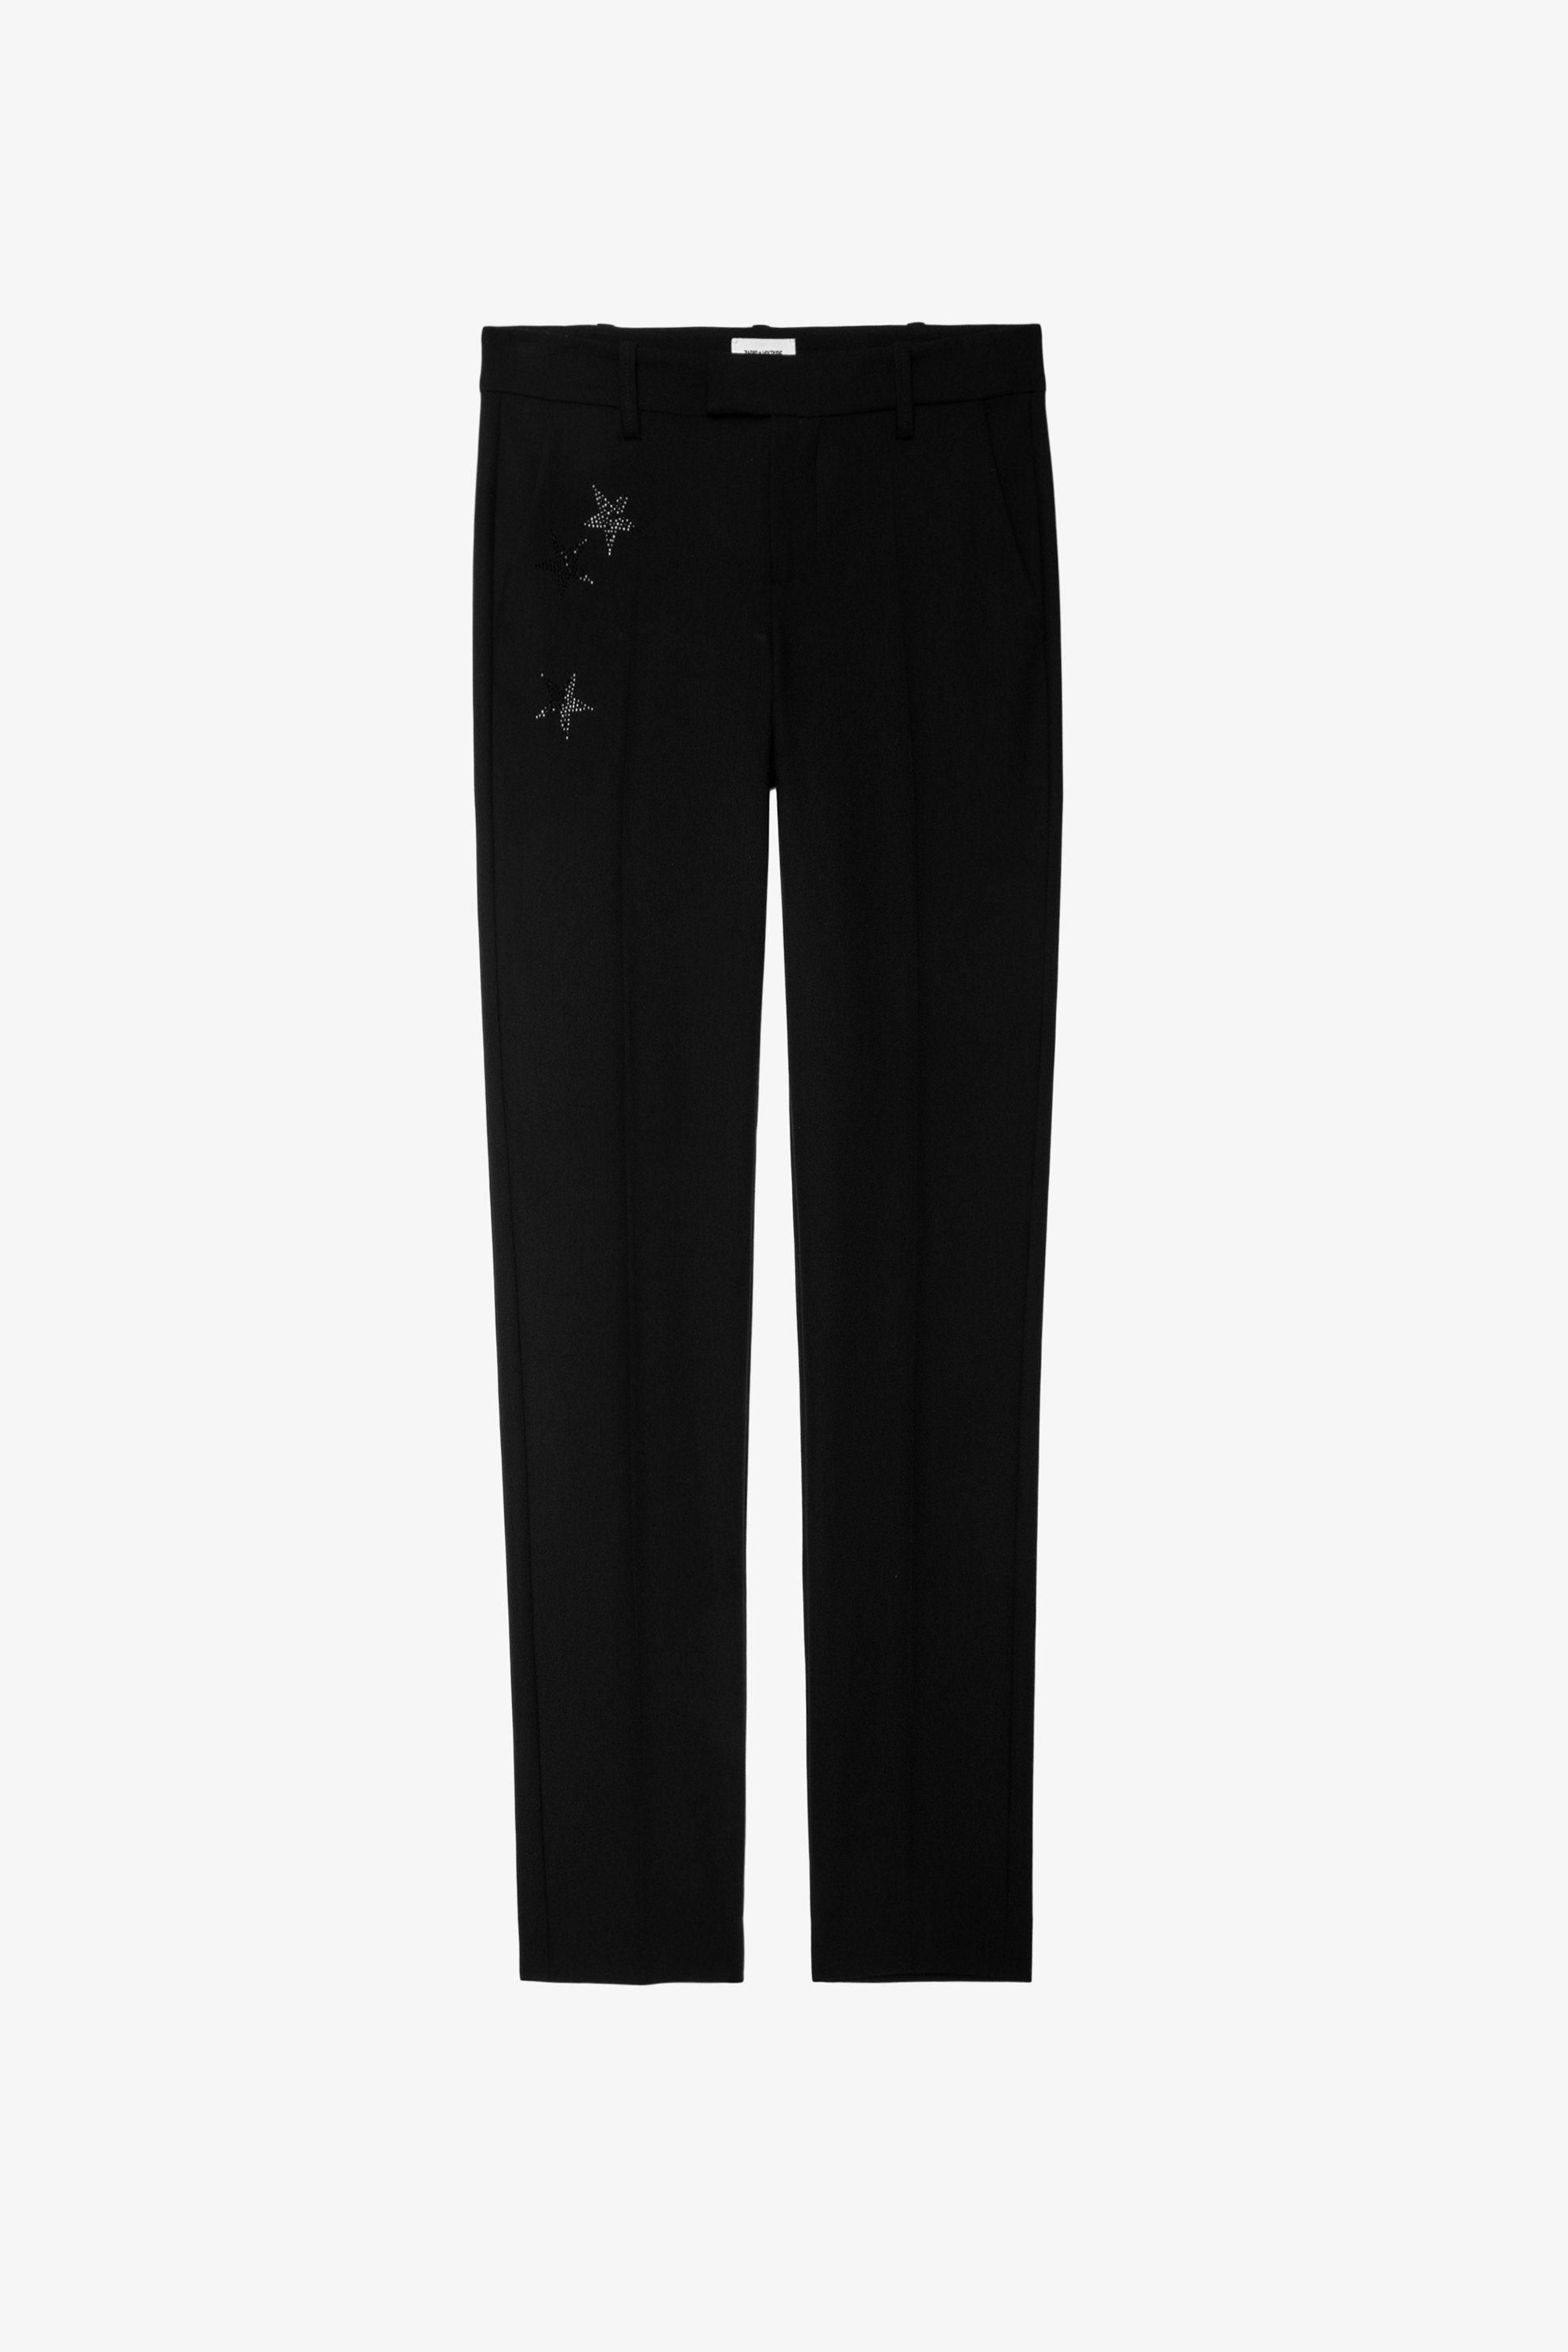 Prune Strass Star Trousers undefined